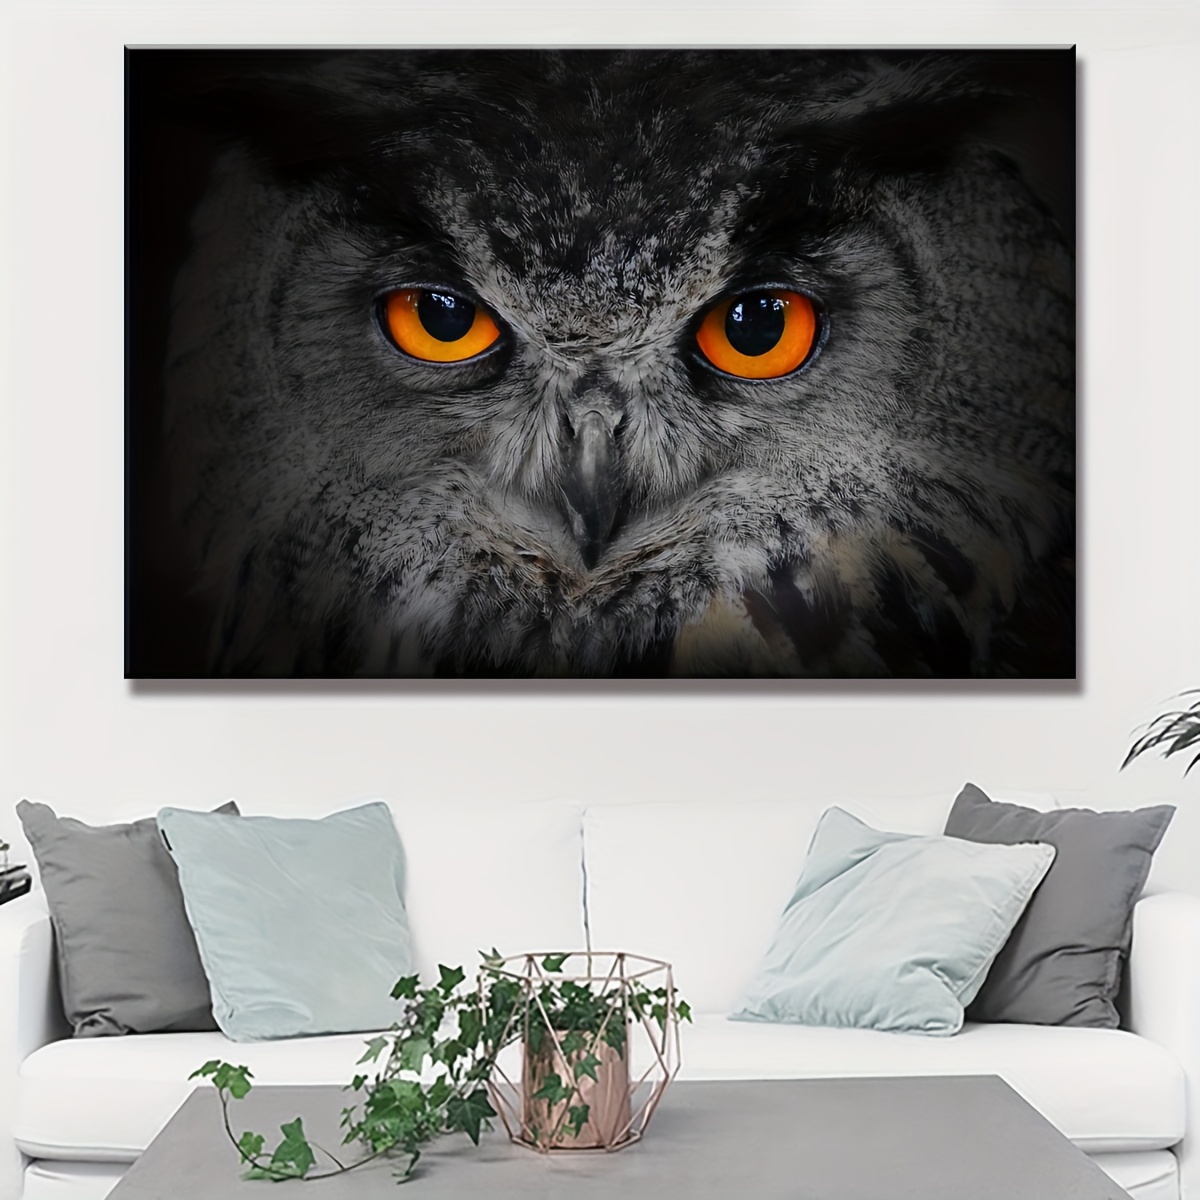 5D DIY Diamond Painting For Adults And Beginners Frameless Owl Diamond  Painting For Living Room Bedroom Decoration 11.81in*15.75in